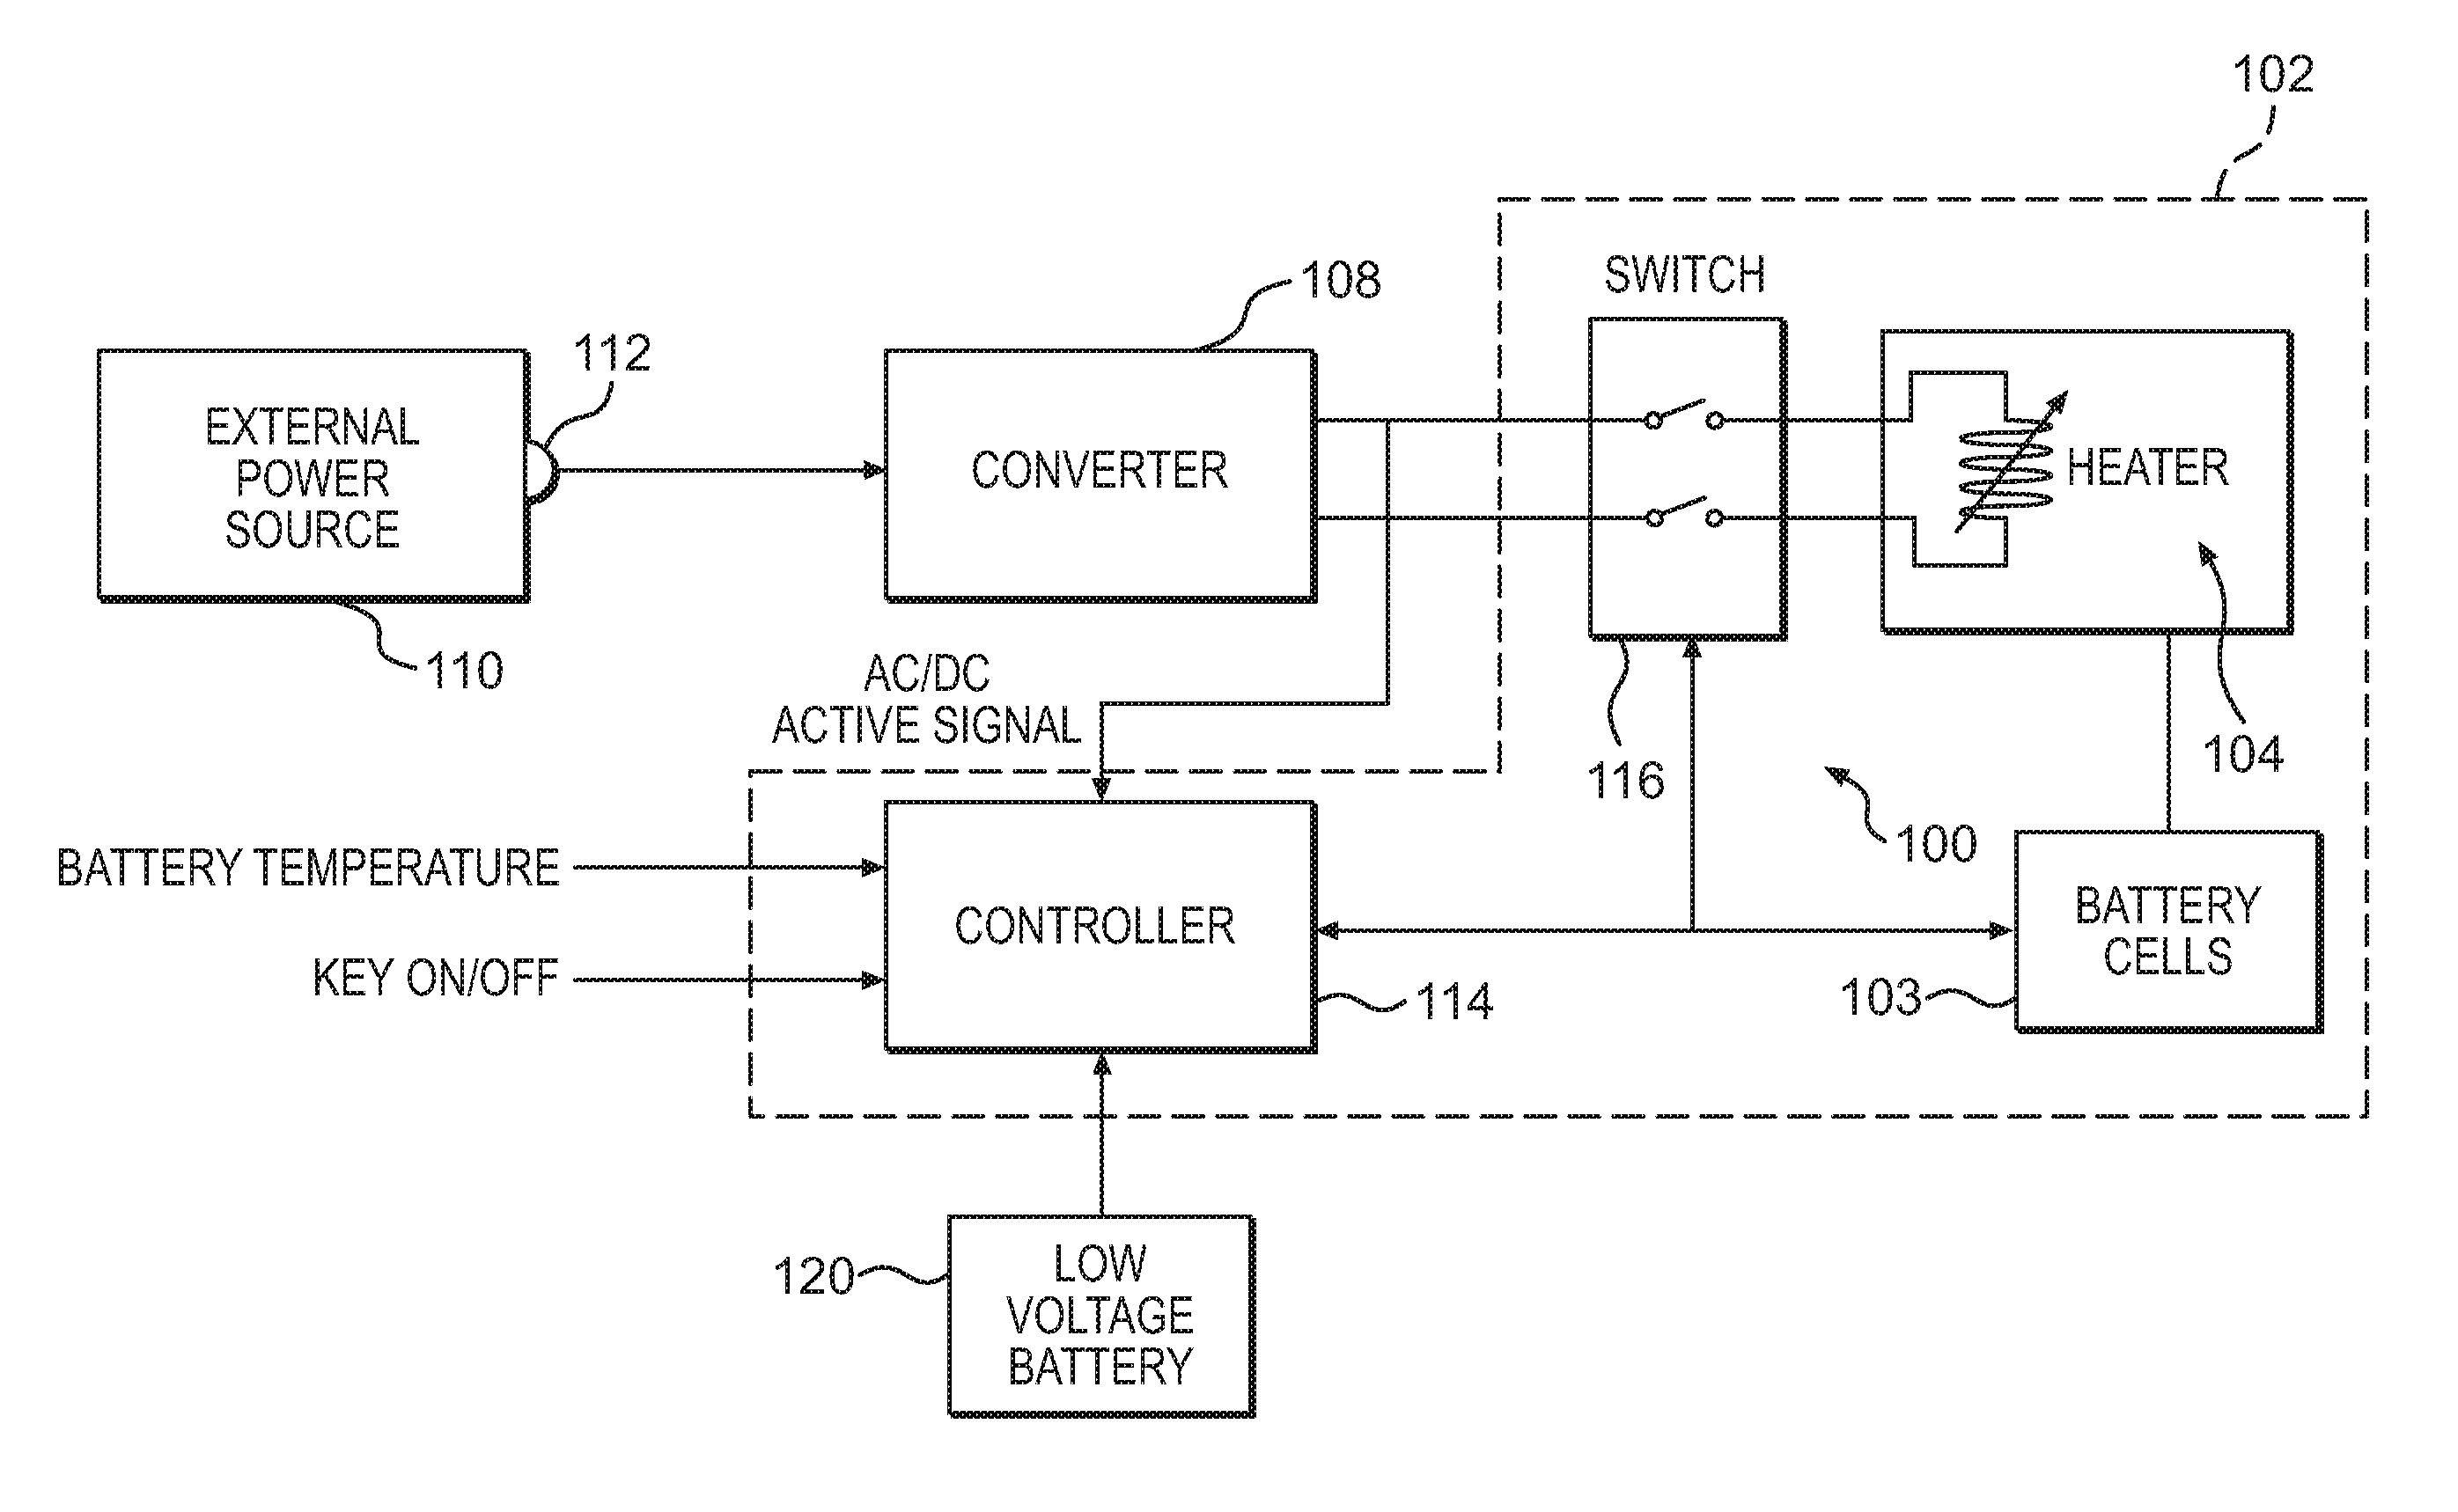 Electrical storage device heater for vehicle